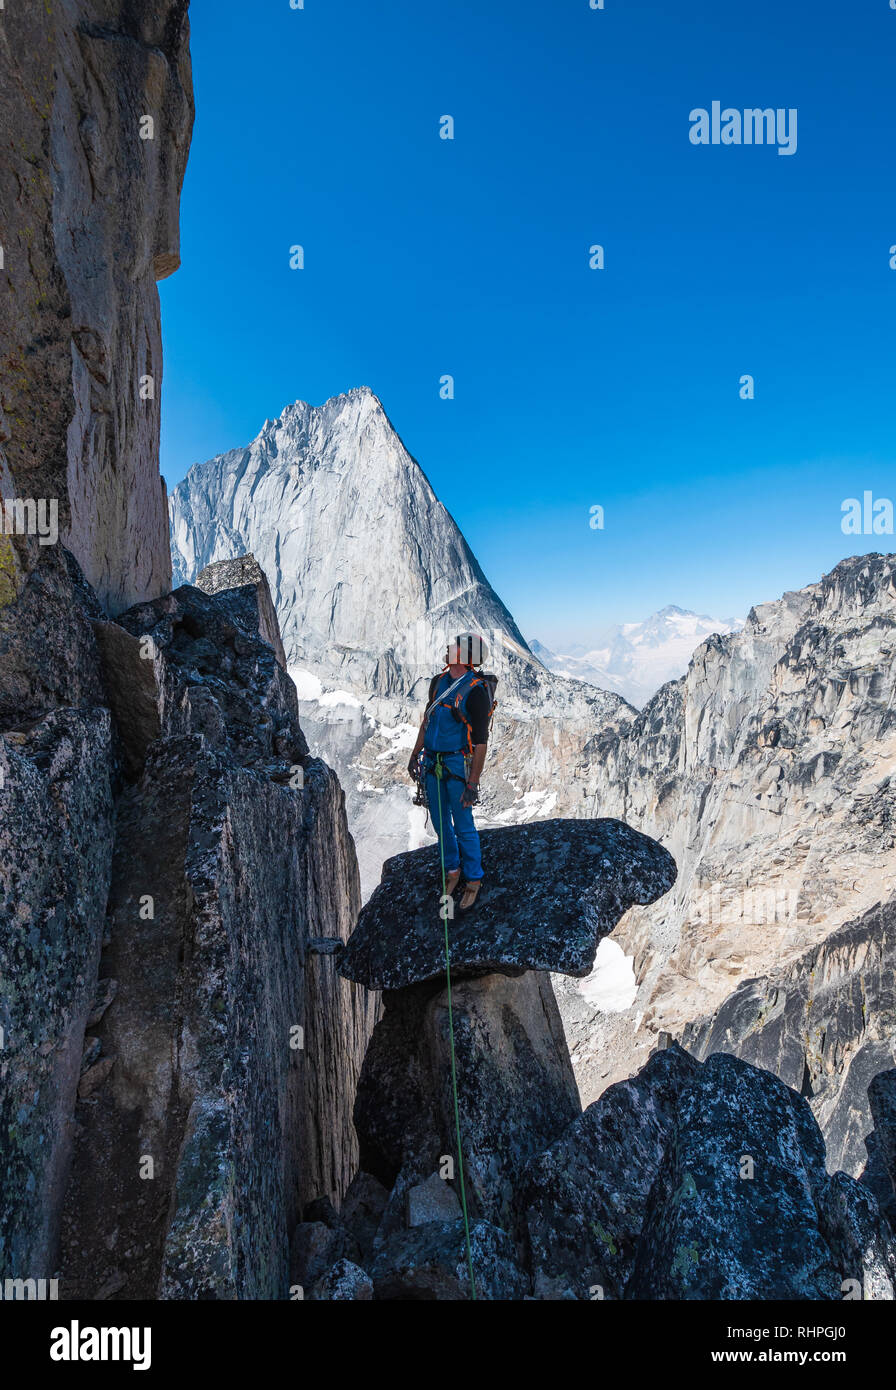 Brandon Prince climbing a route called Ears Between 5.7 in the Purcell Mountains Stock Photo